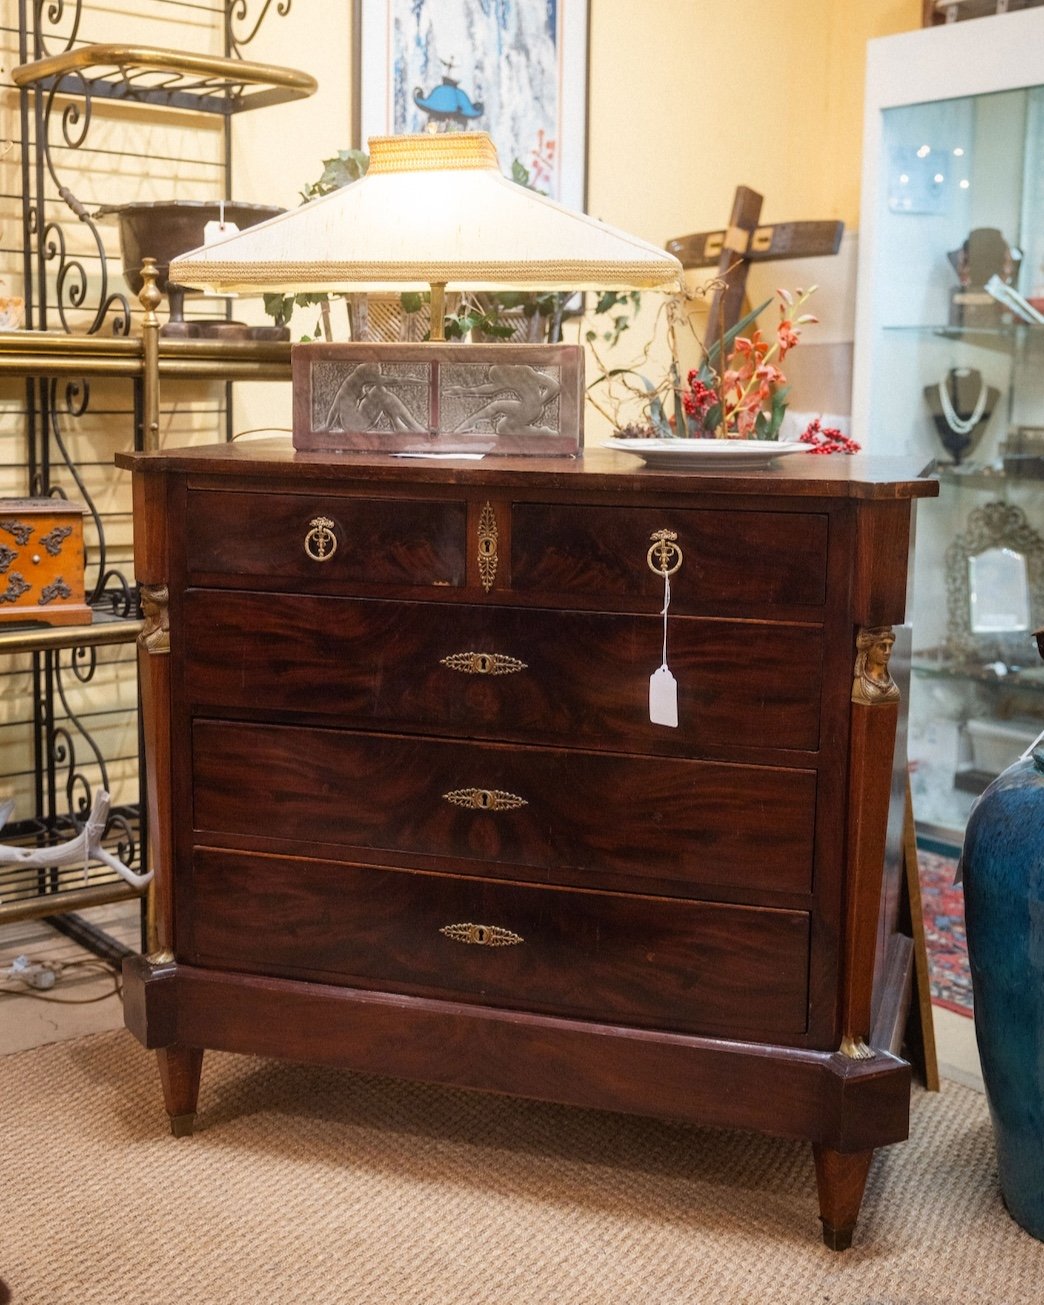 If you&rsquo;re in the market for new furniture, why not #ShopAntique instead? 😍 In addition to giving an item a new lease on life, you&rsquo;re reducing landfill and keeping #history alive. ⠀
⠀
Come by to shop every day between 10am-6pm! #AntiqueSh